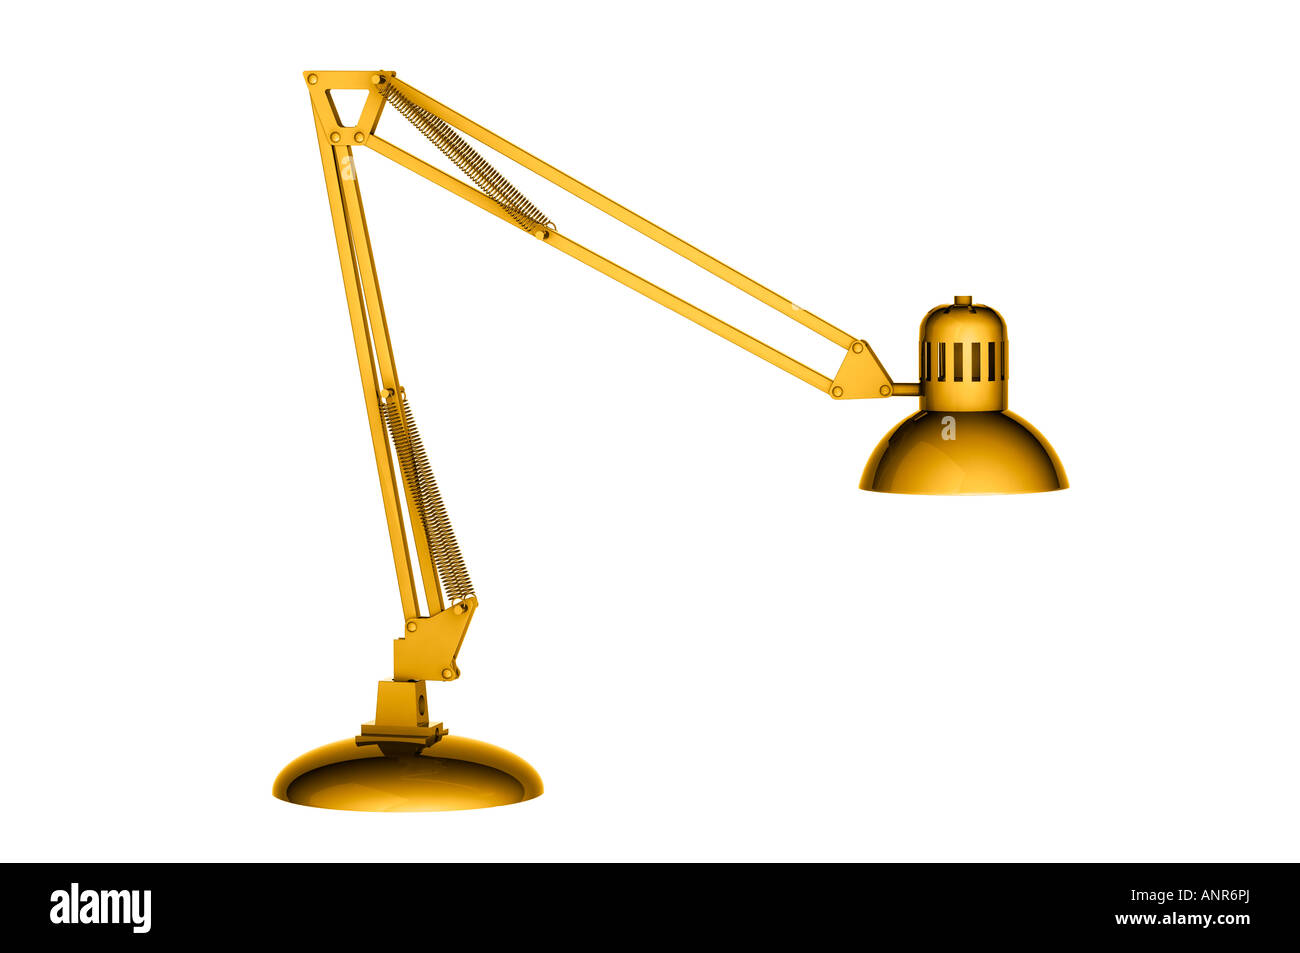 Golden Anglepoise table lamp Stock Photo